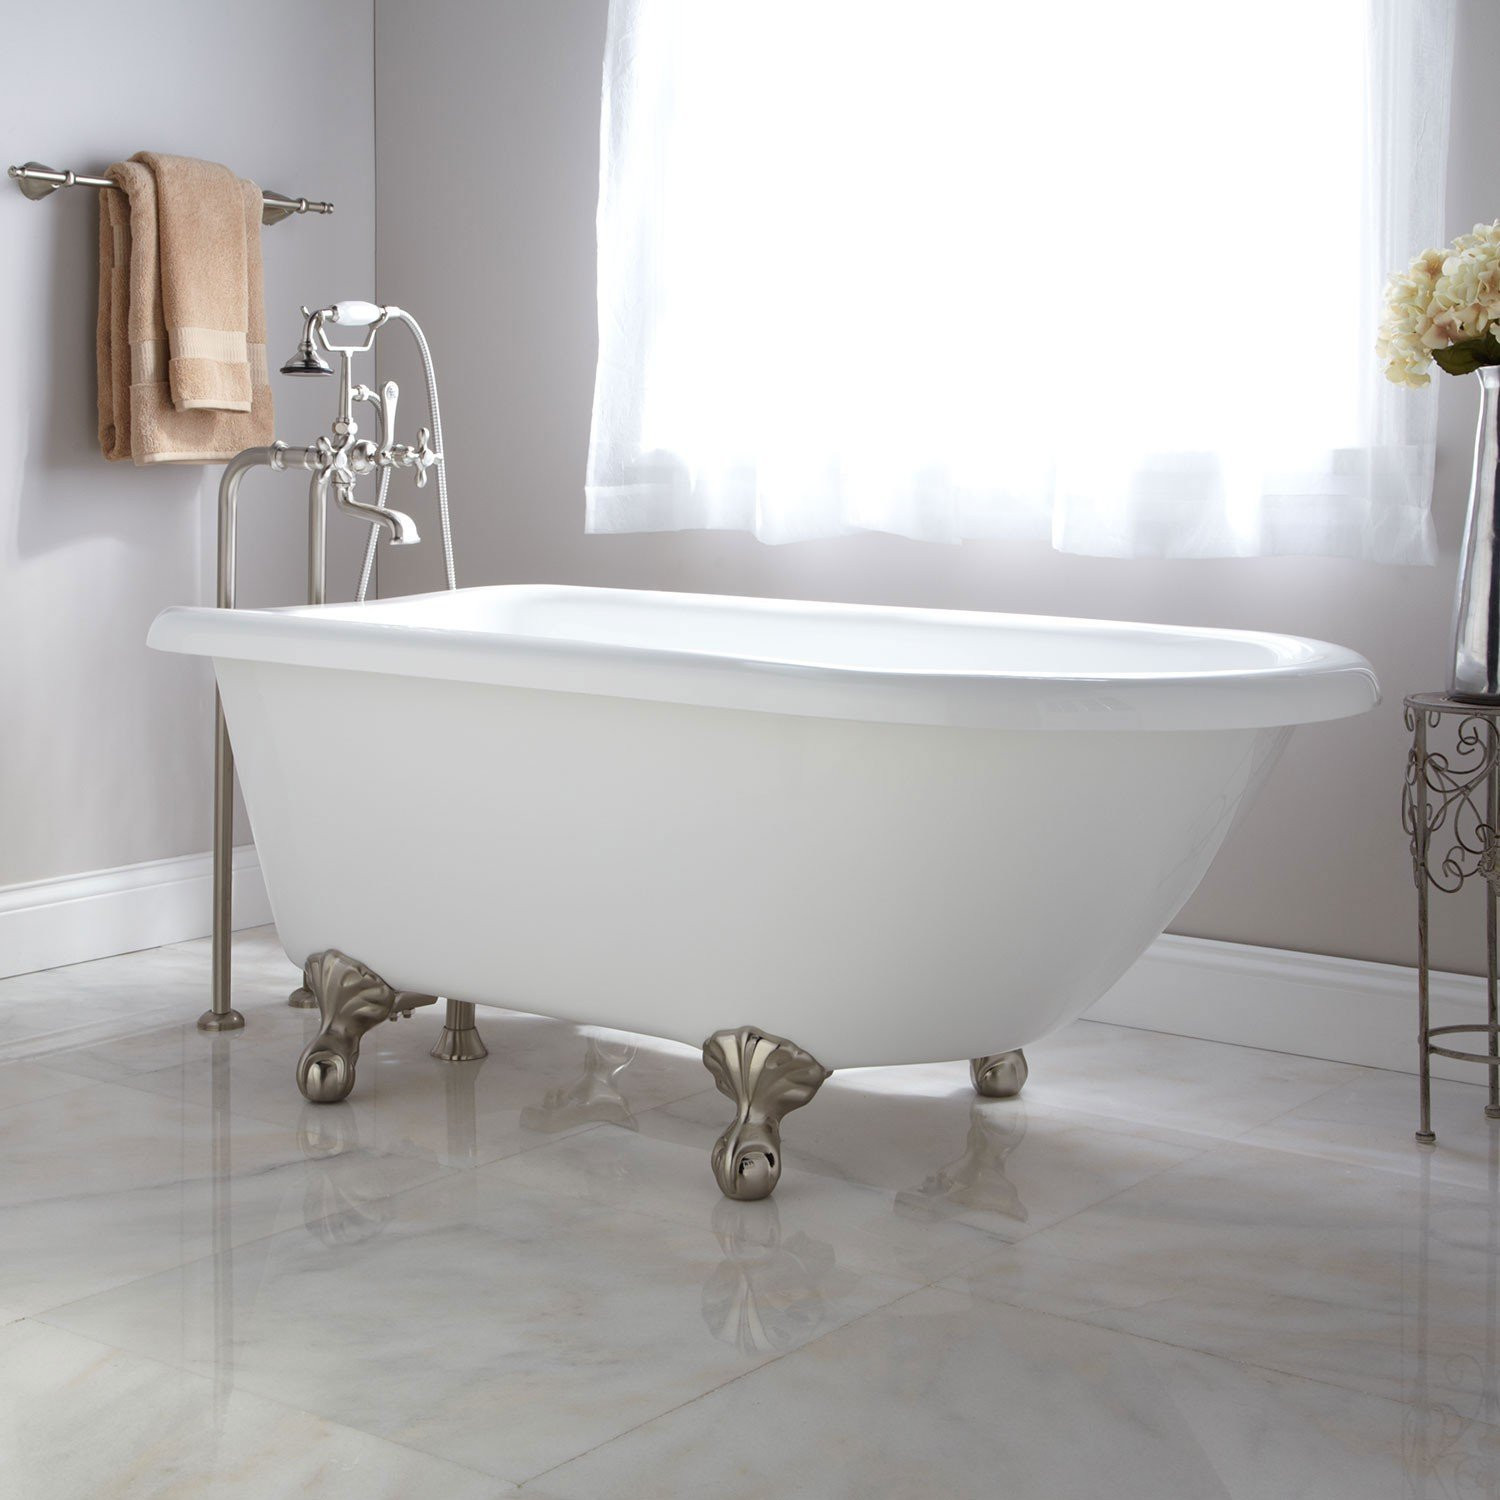 Small Bathroom With Tub
 20 Best Small Bathtubs to Buy in 2016